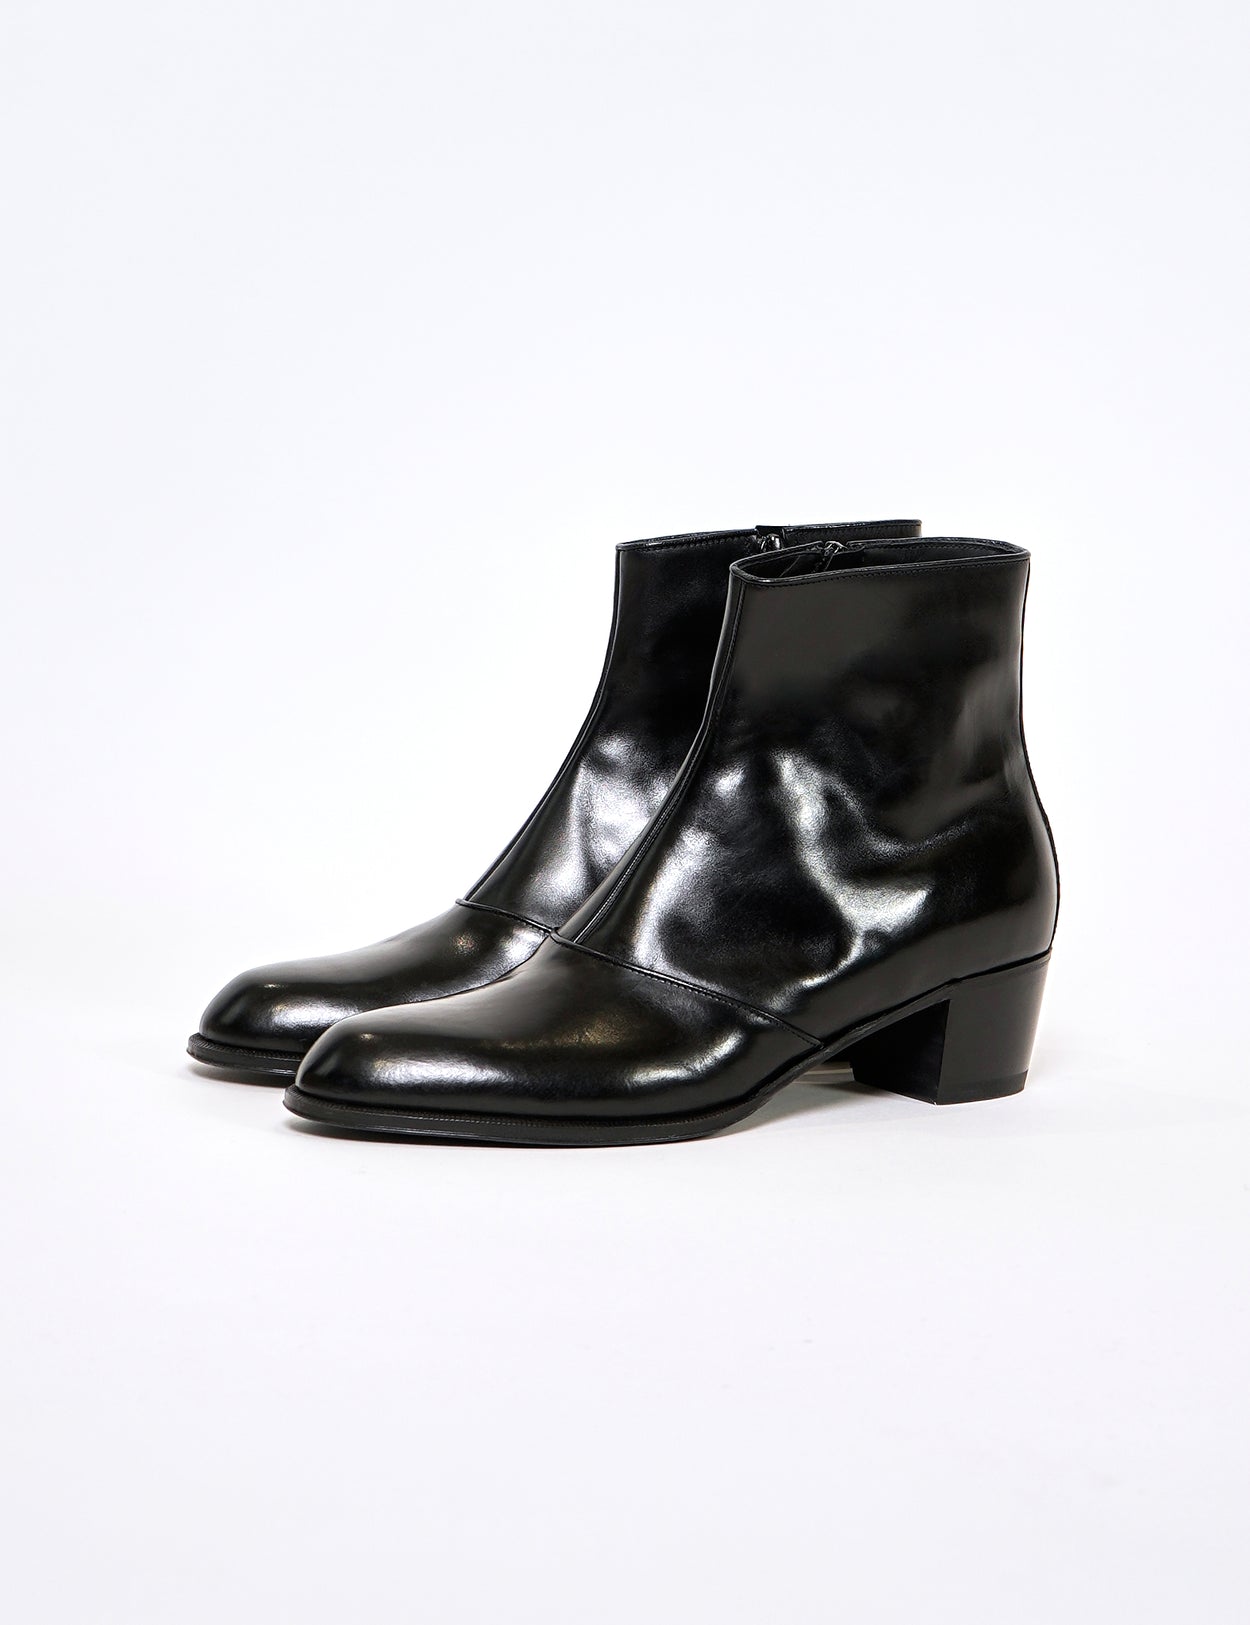 BLACK CROMO CALF leather BOOTs